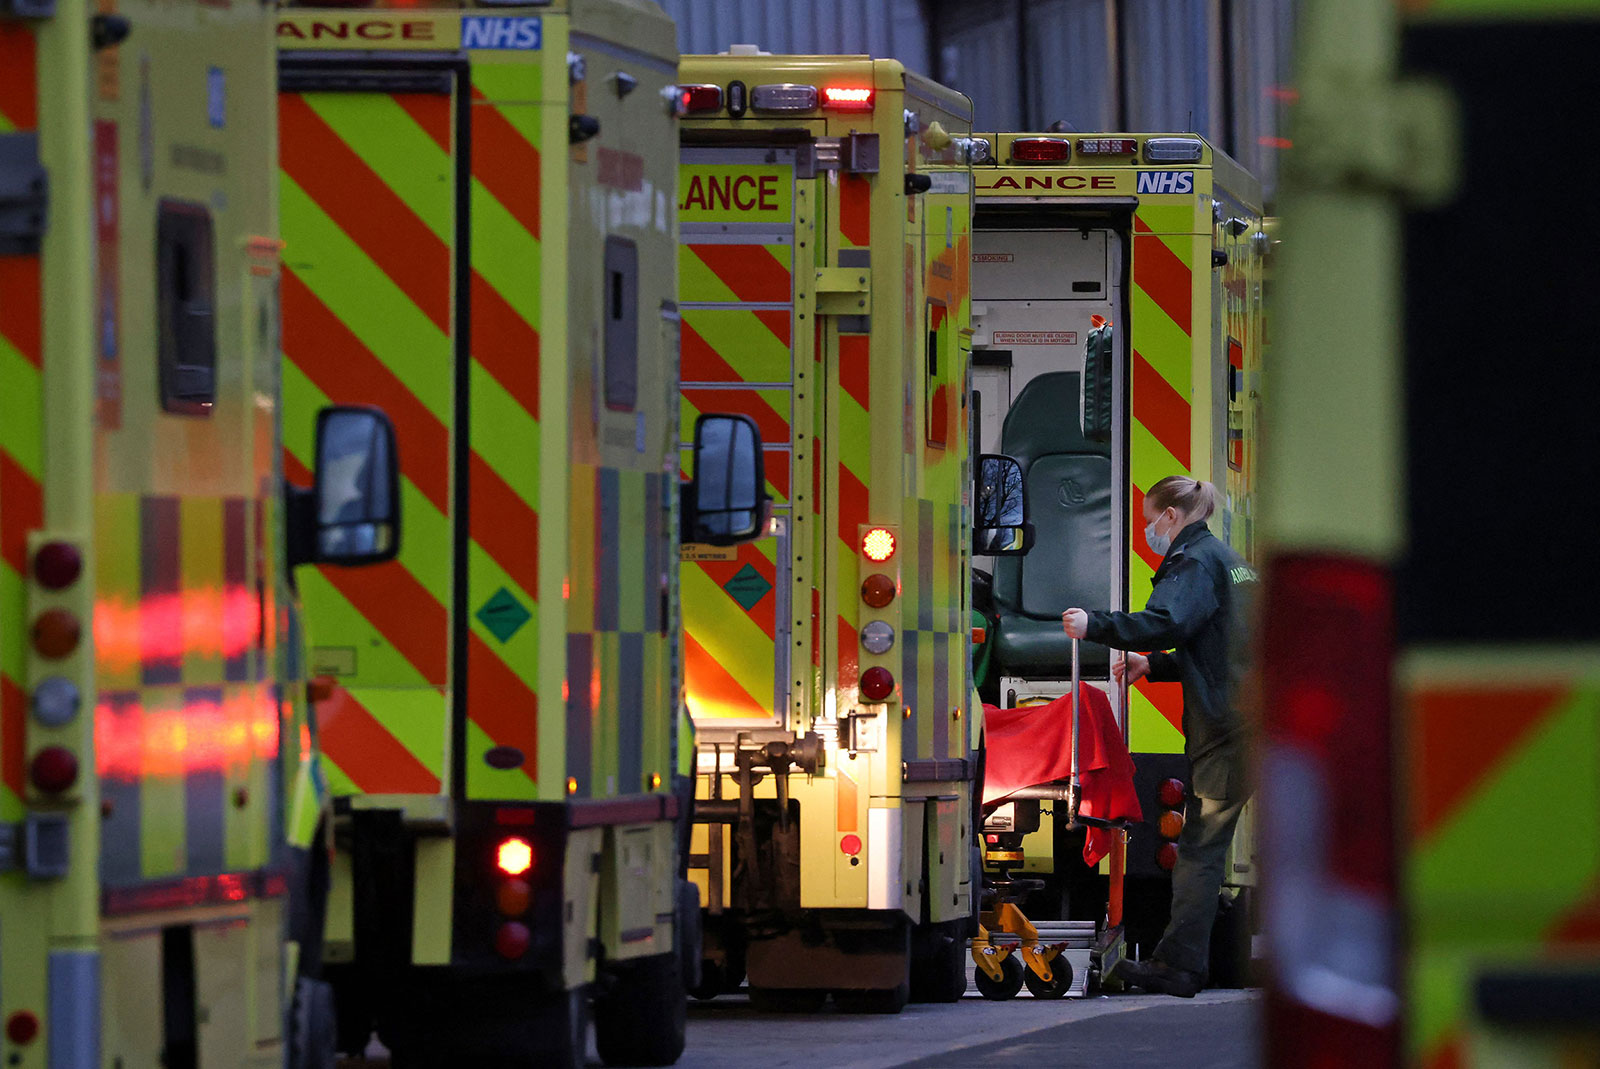 A paramedic unloads a patient from an ambulance outside the Royal London hospital in London on December 28.